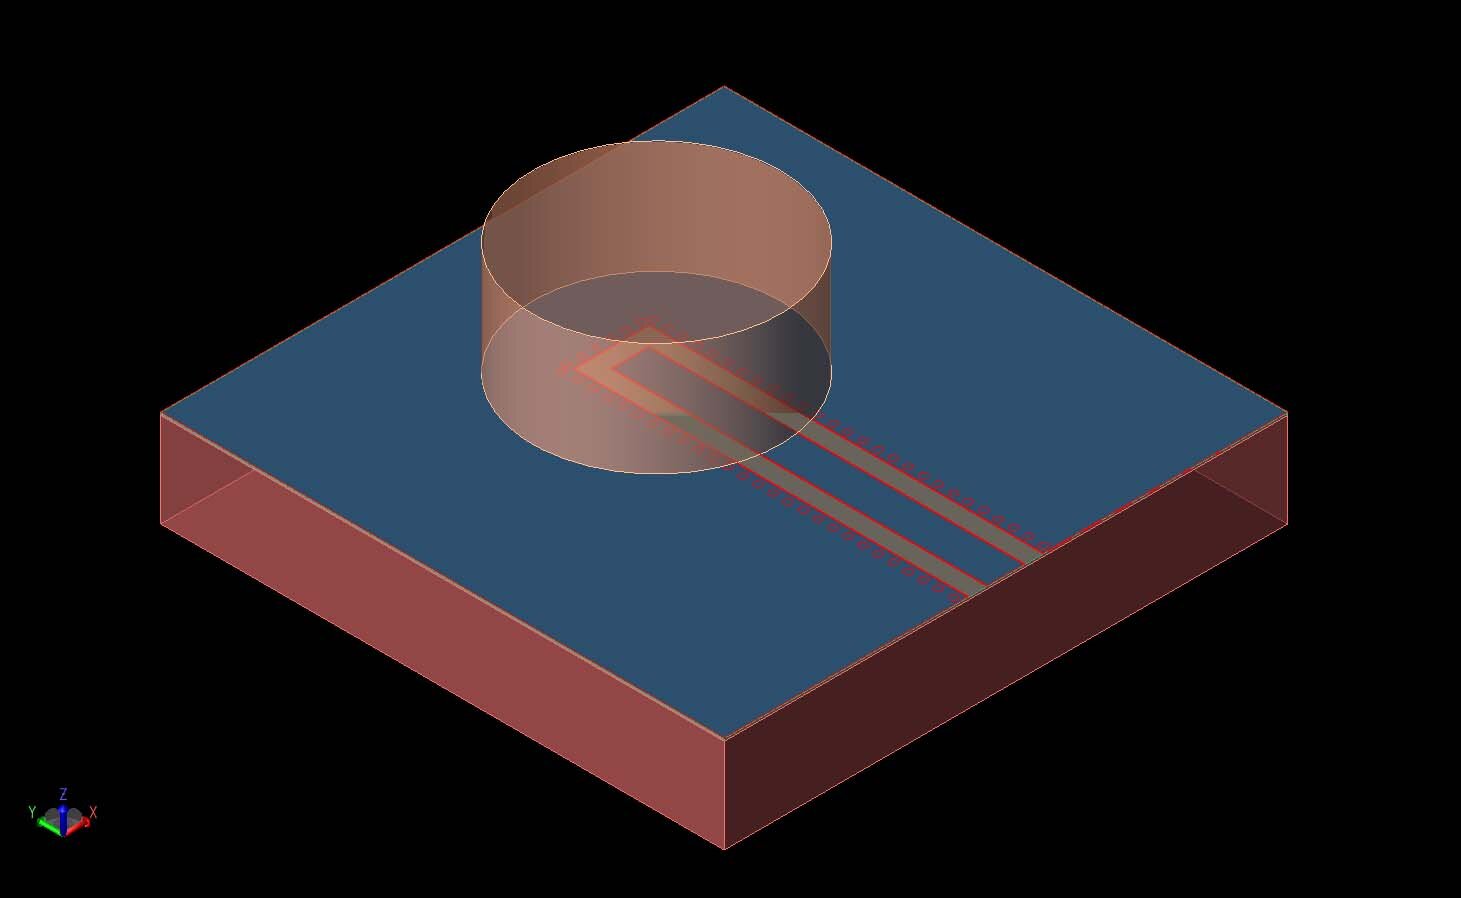 Figure 1:  A three-dimensional view of the on-chip dielectric resonator antenna is visible as a CAD drawing.  The cylindrical resonator is shown above the co-planar waveguide feed.  The silicon base layer is at the bottom.